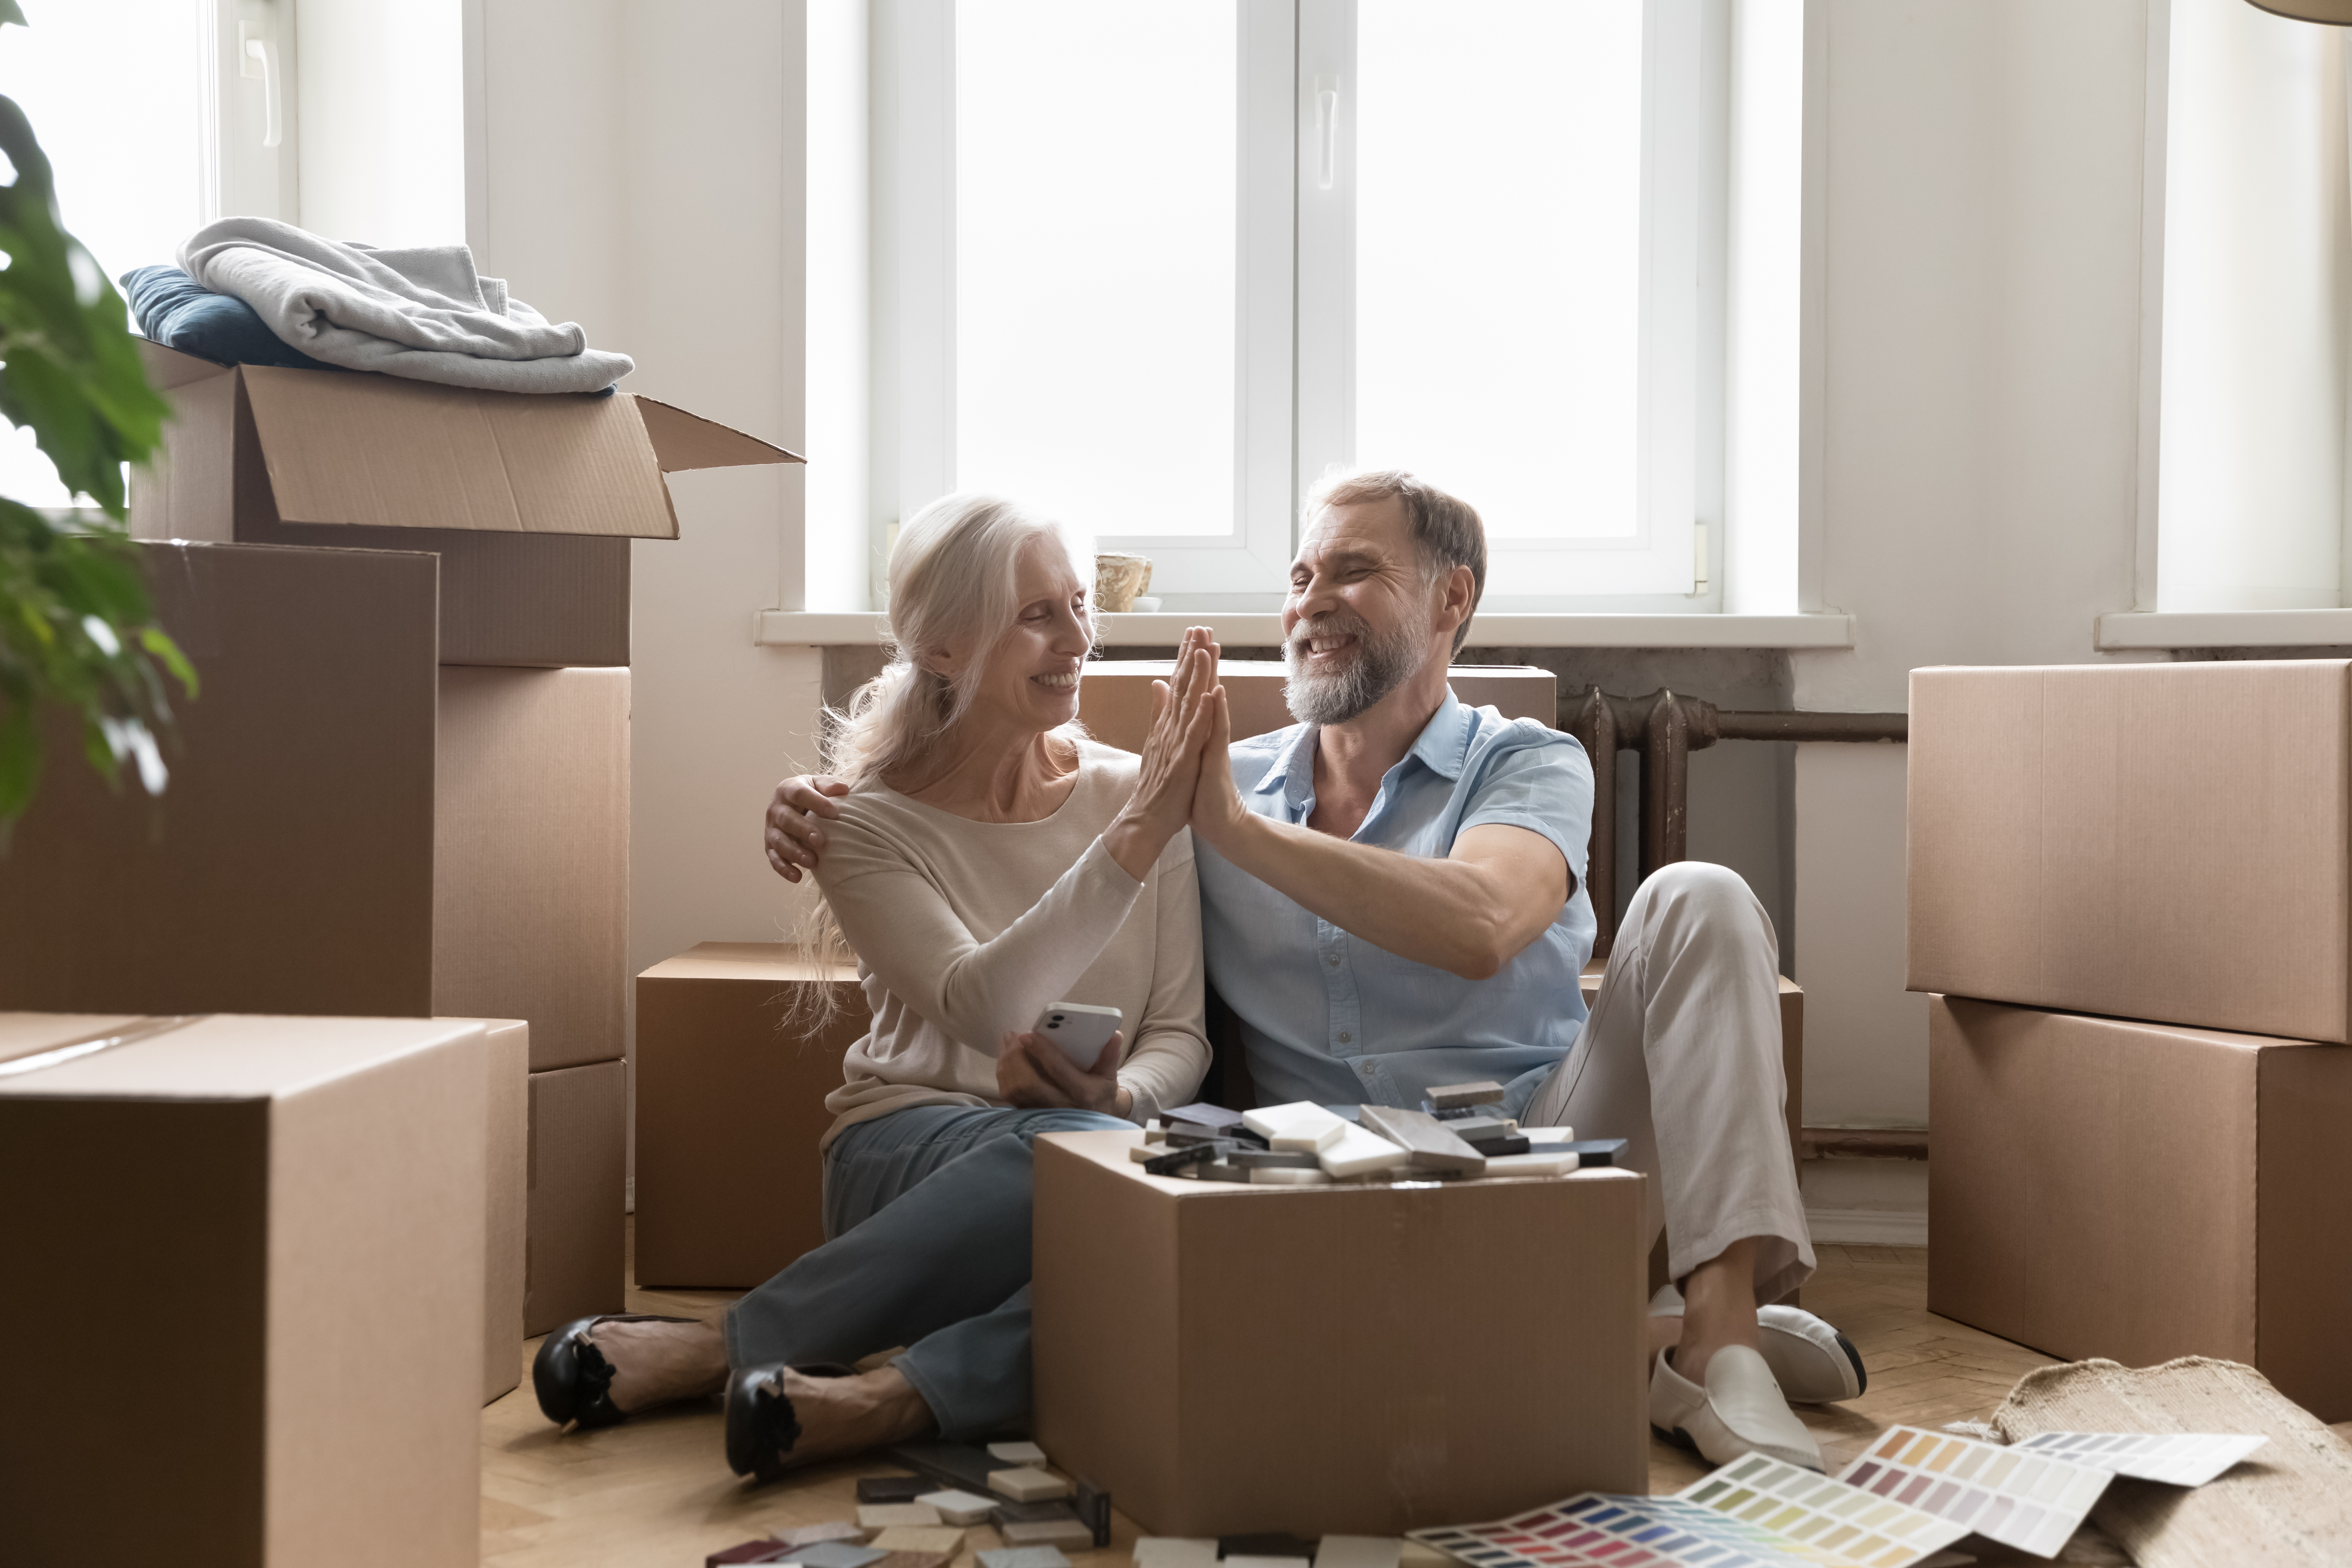 Senior married couple of home owners discussing interior design improvement, clapping hands, giving high five over moving box, decoration samples, hugging, laughing, sitting on color in new apartment